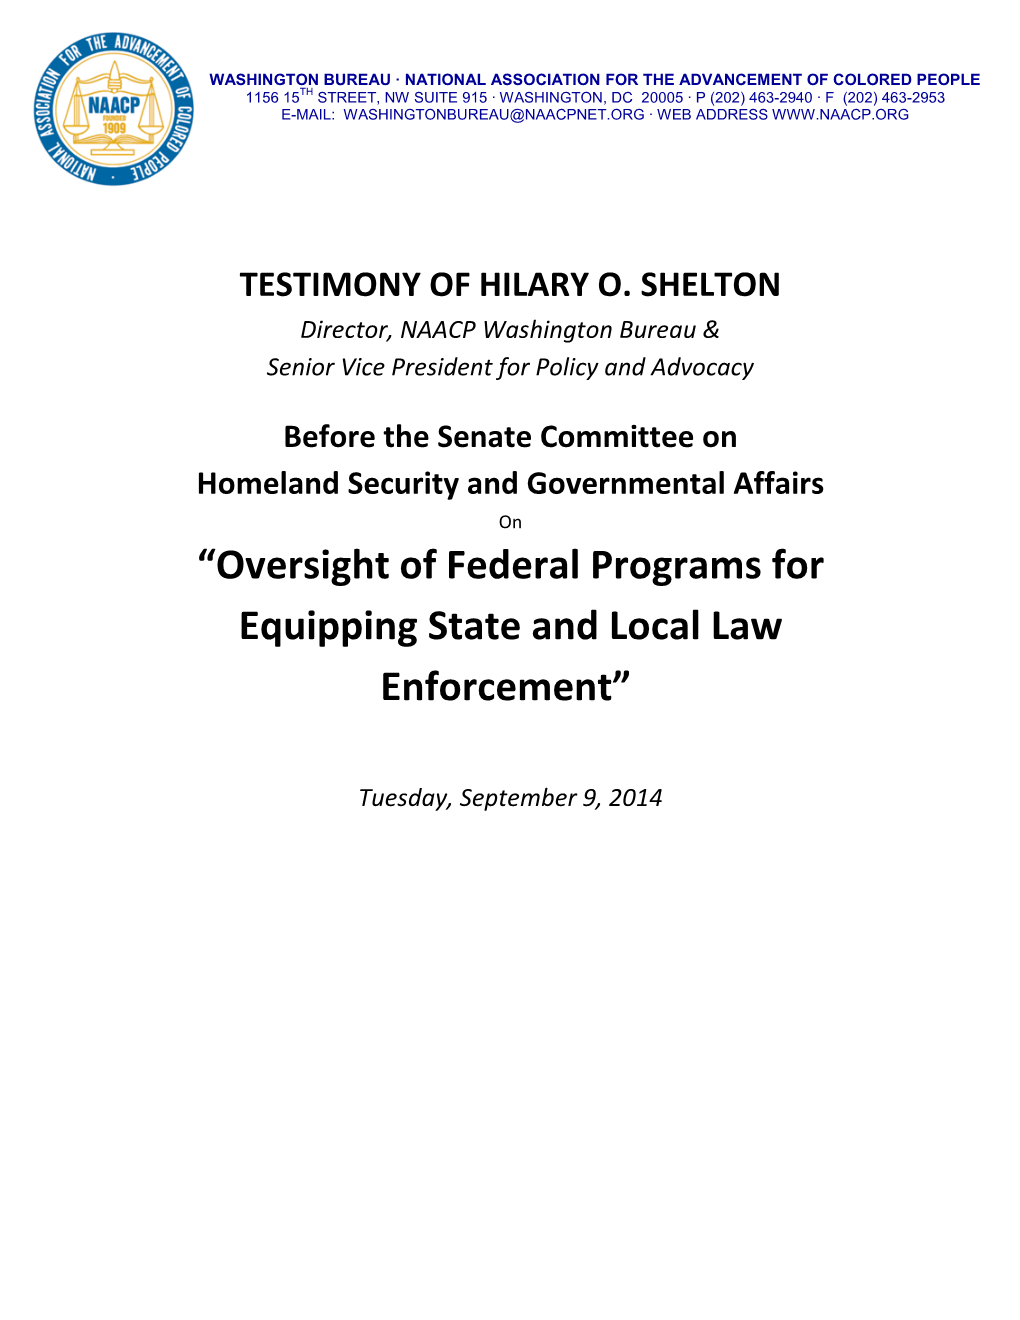 “Oversight of Federal Programs for Equipping State and Local Law Enforcement”